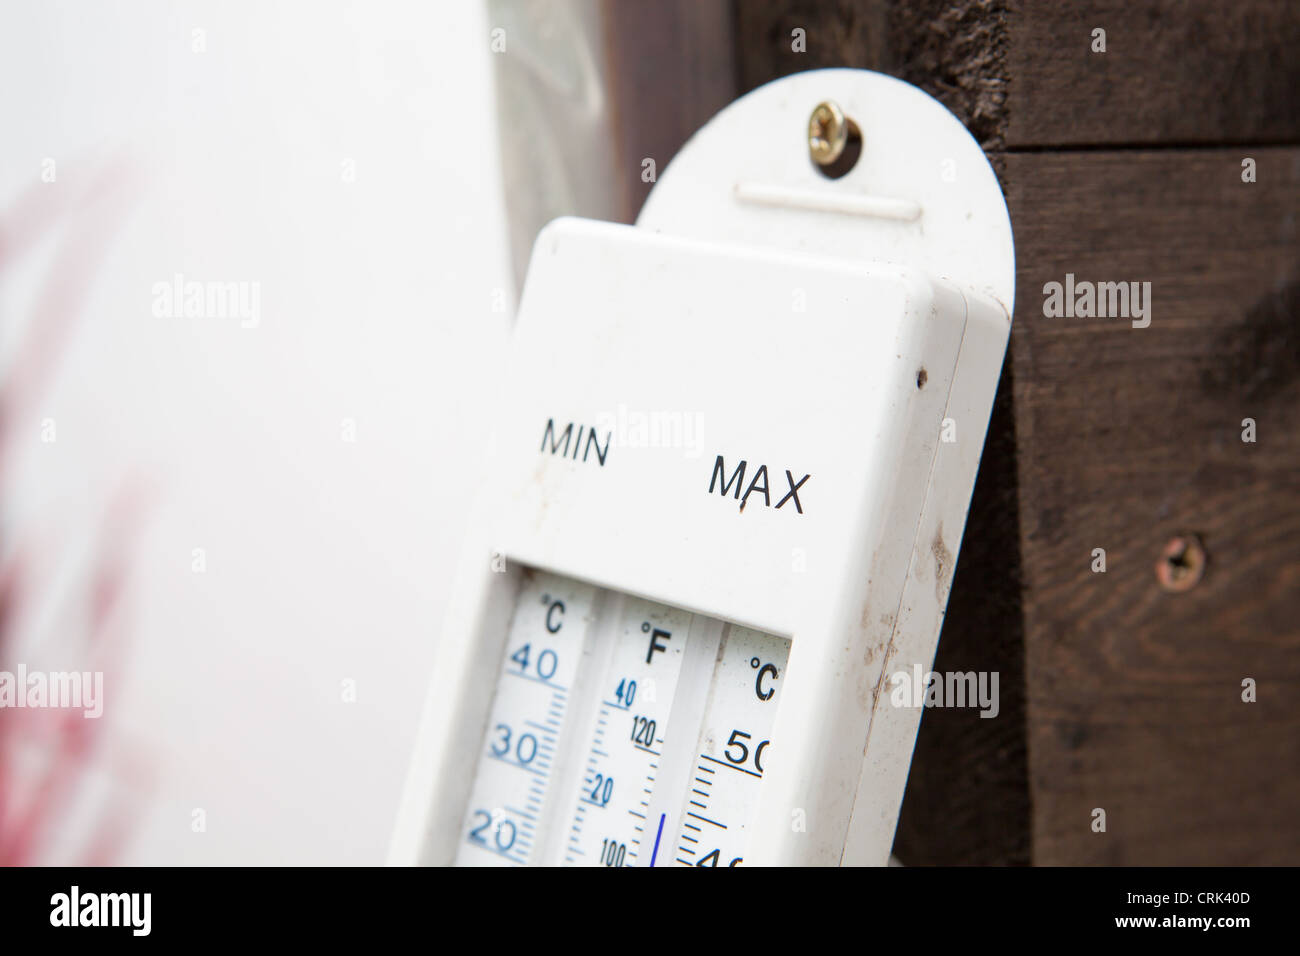 https://c8.alamy.com/comp/CRK40D/maximum-and-minimum-thermometer-used-here-in-the-garden-to-keep-track-CRK40D.jpg